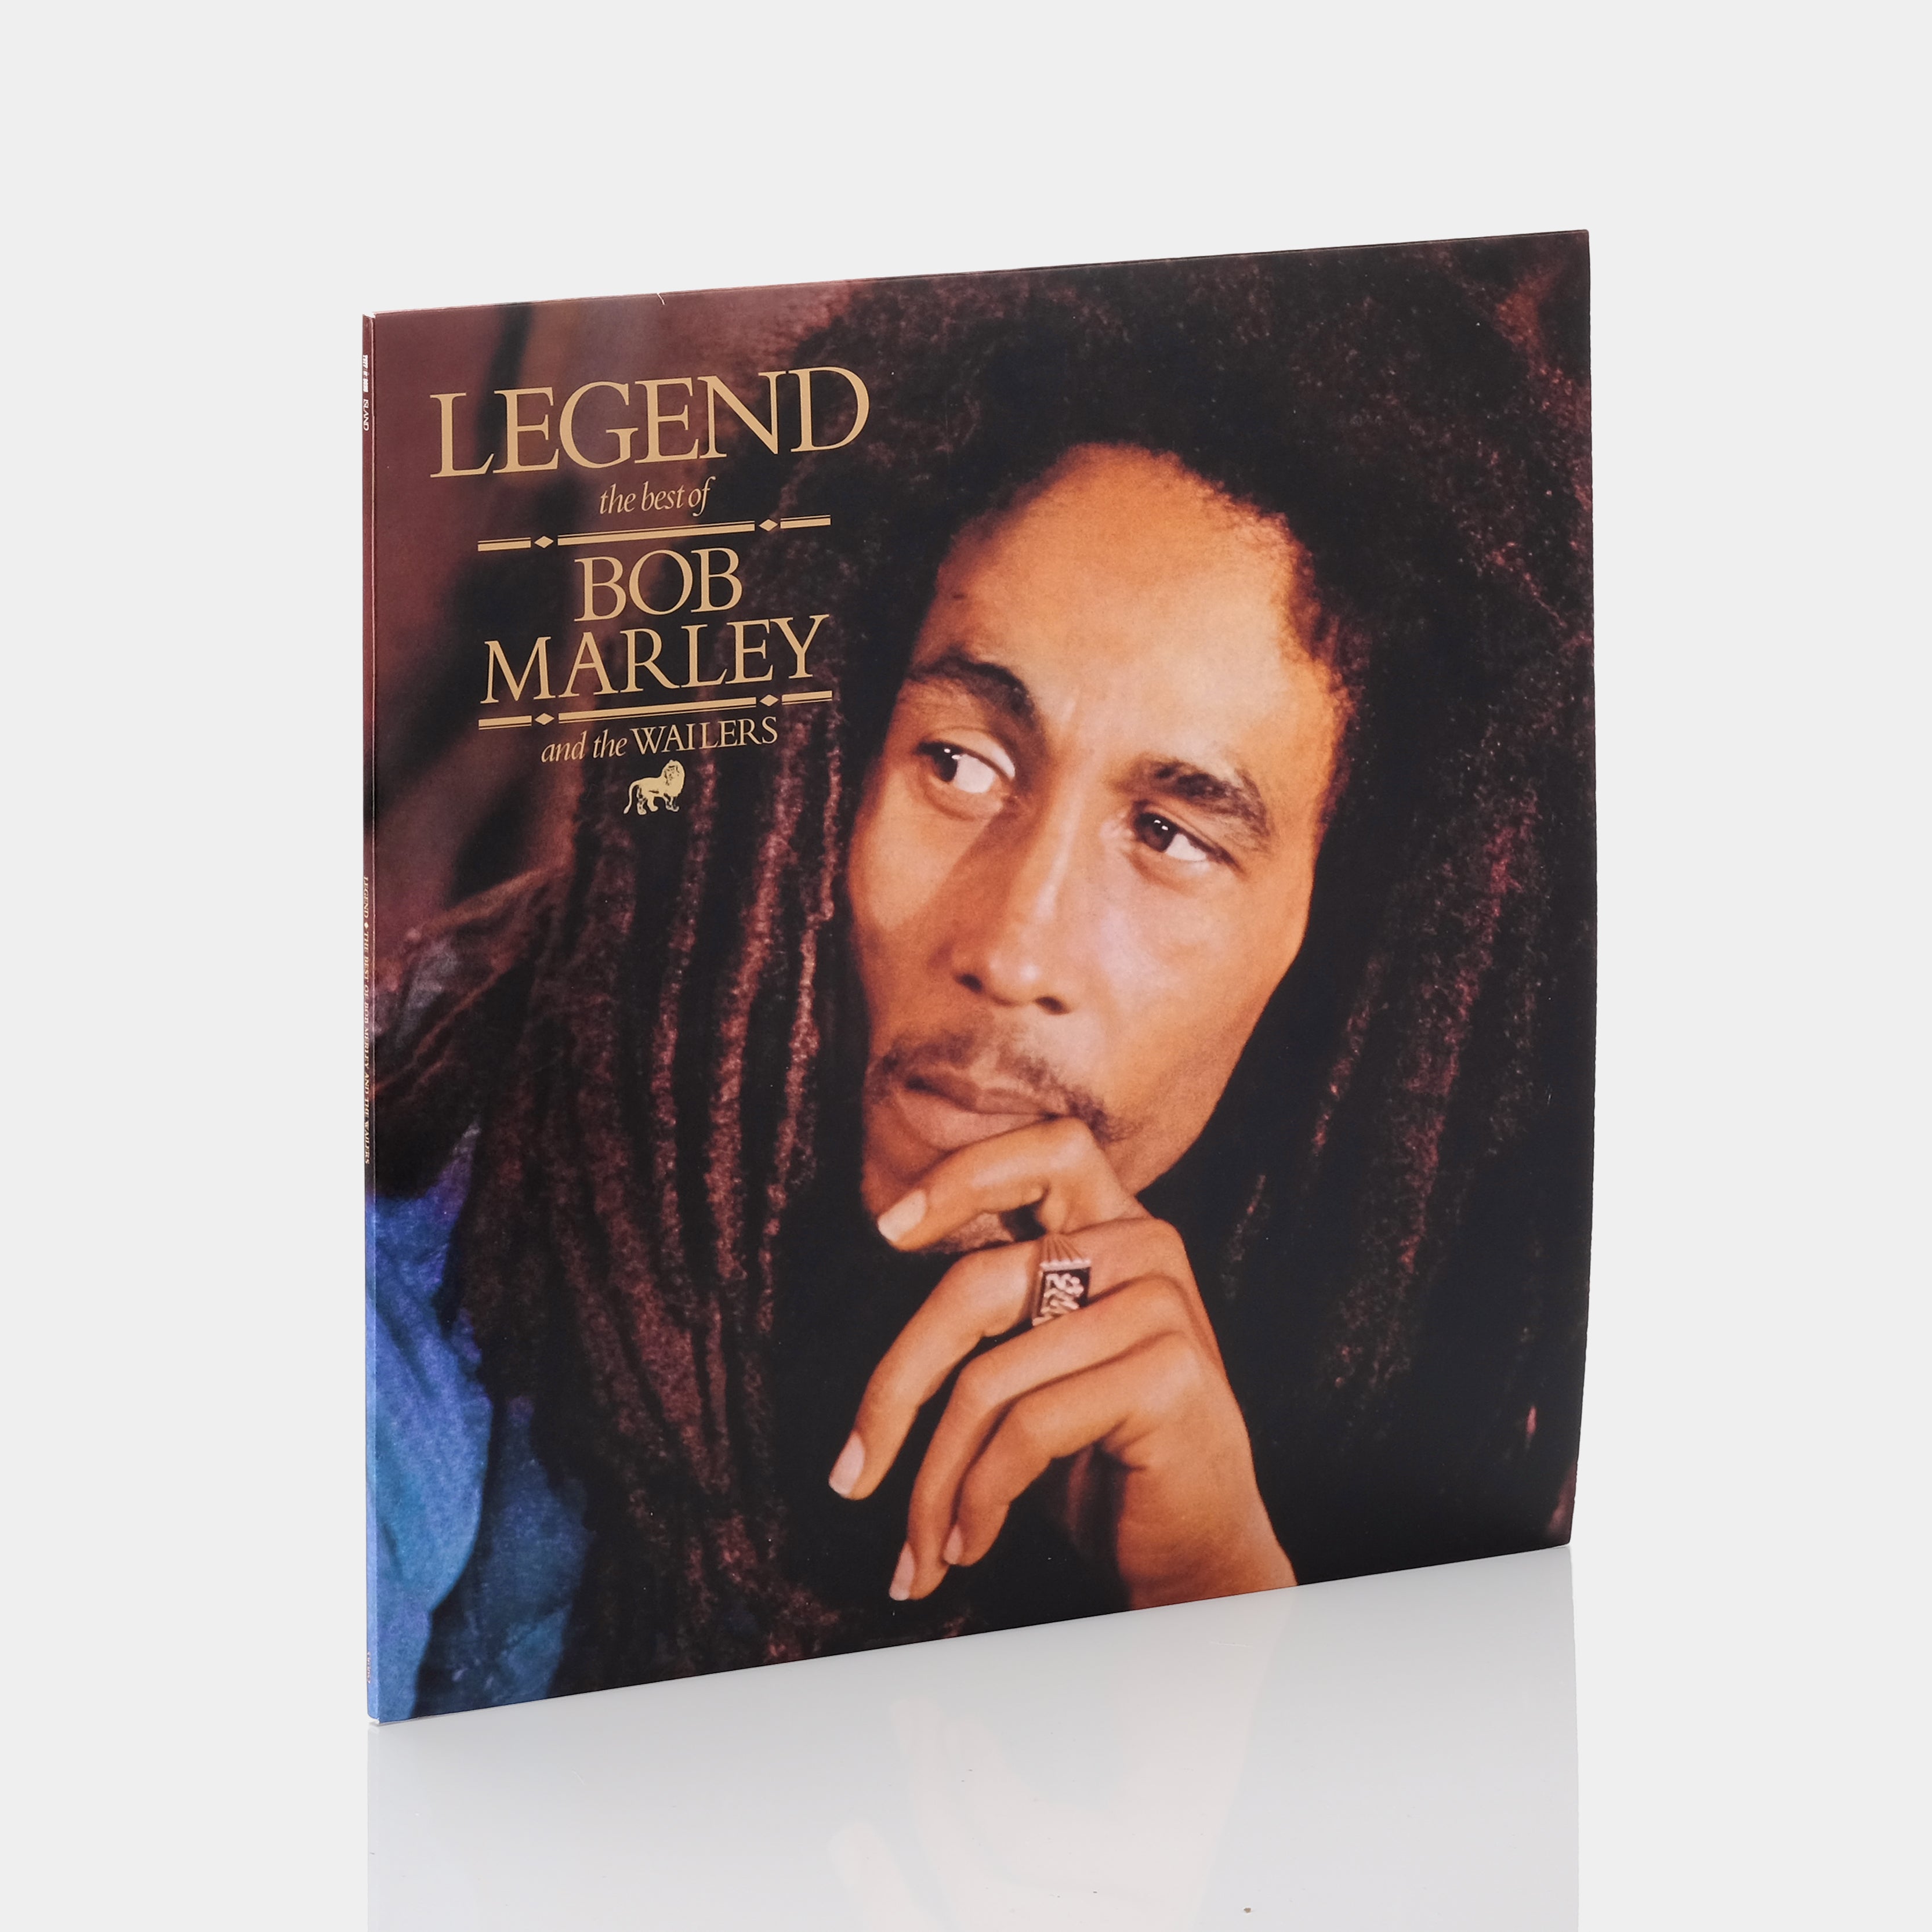 Bob Marley & The Wailers - Legend: The Best Of Bob Marley And The Wailers LP Vinyl Record